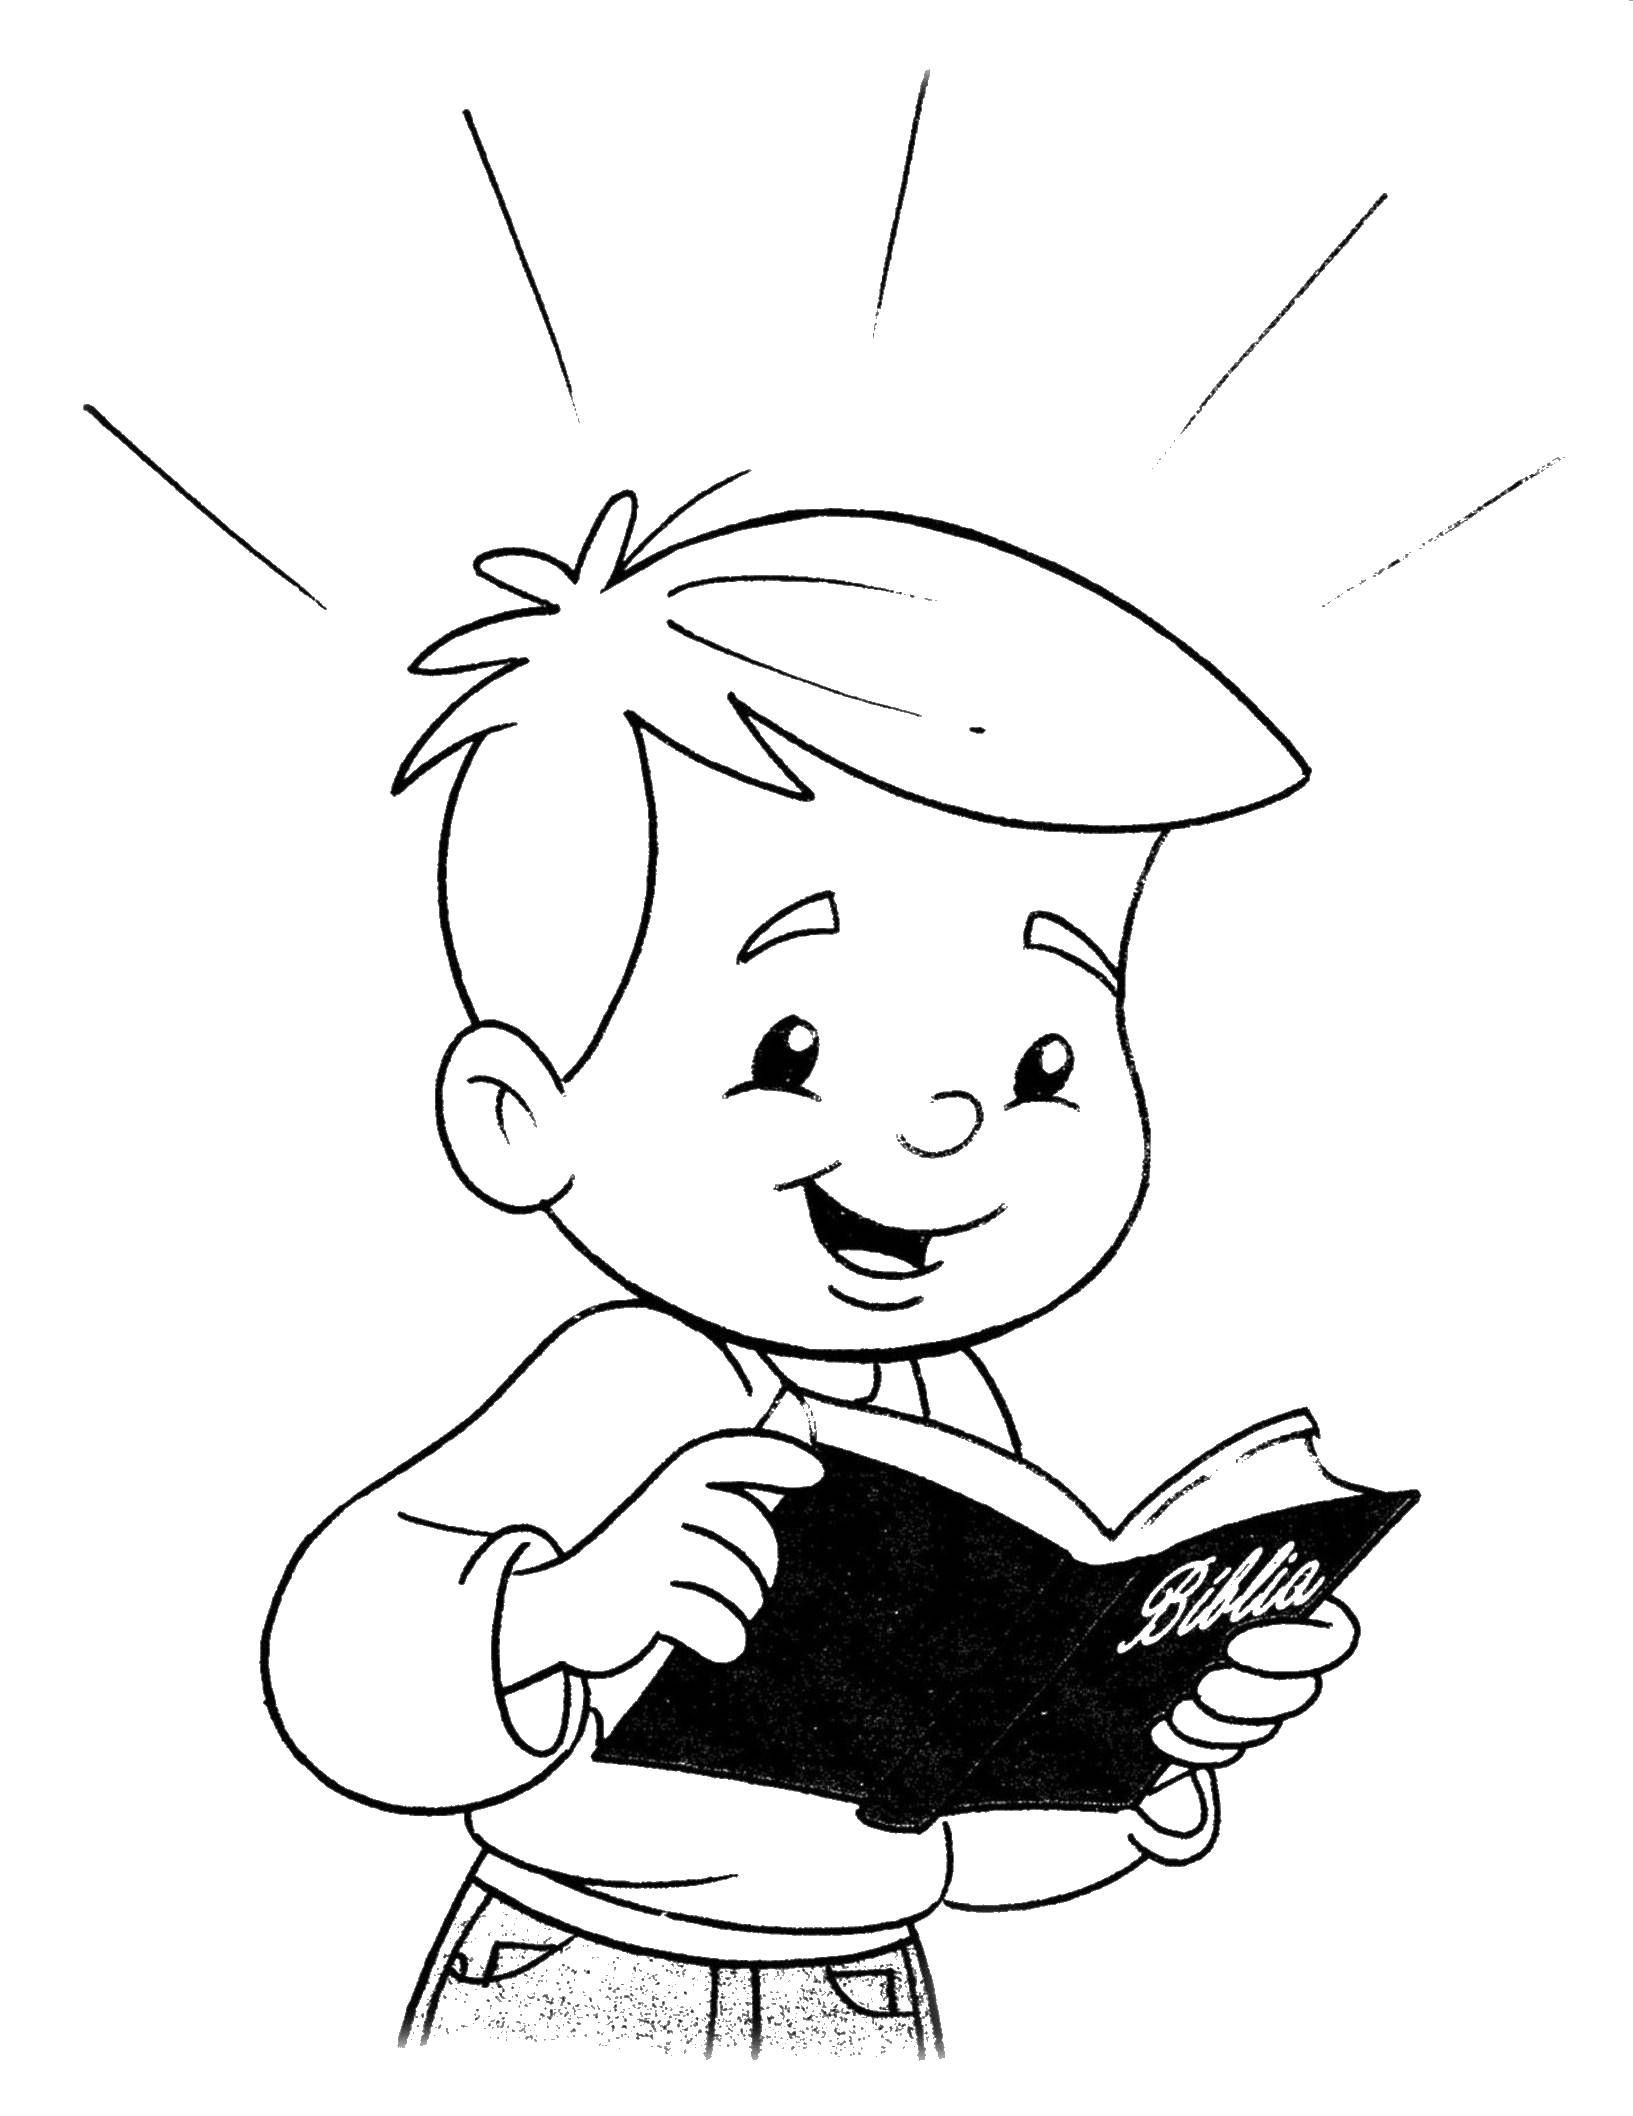 Coloring Boy with a Bible. Category the Bible. Tags:  children, boy, the Bible.